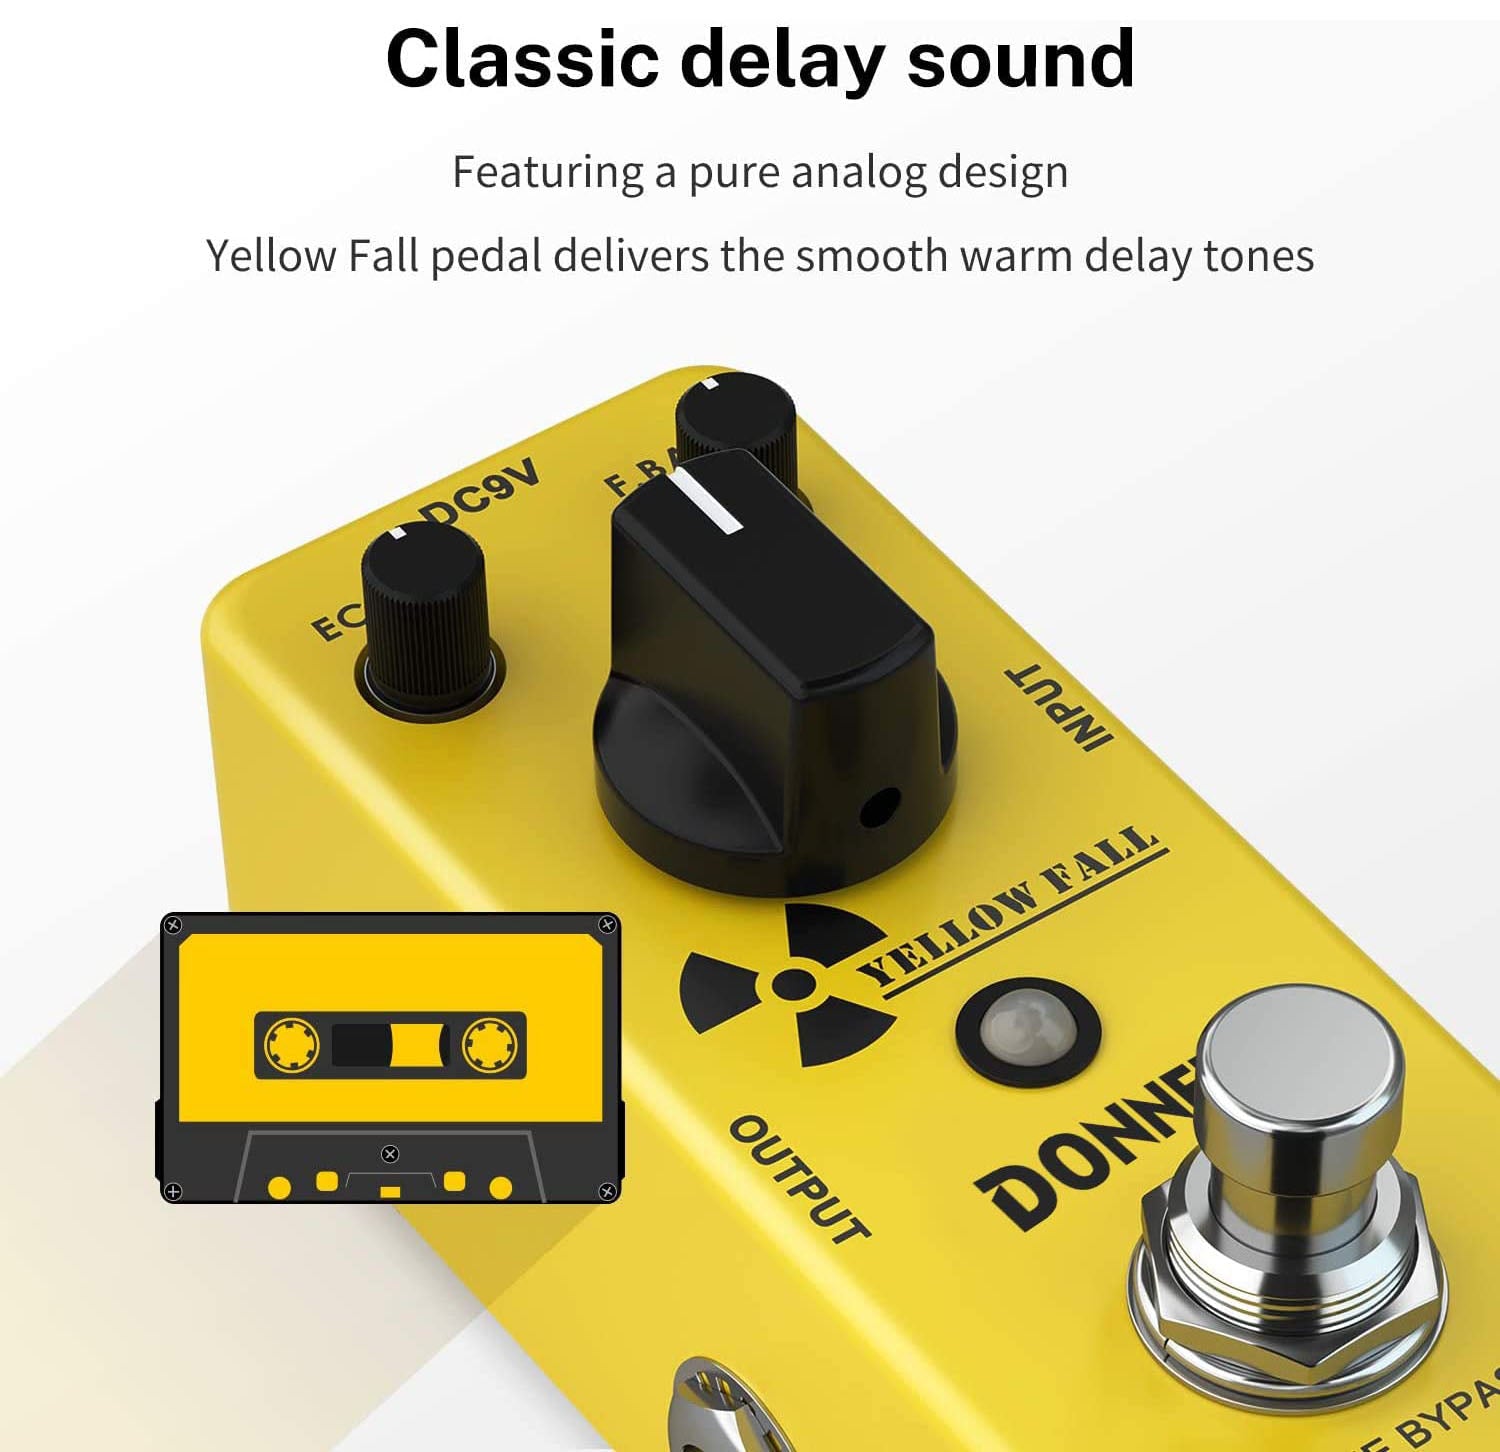 Donner Yellow Fall Analog Delay Guitar Effect Pedal Vintage Delay True Bypass - Hollywood DJ